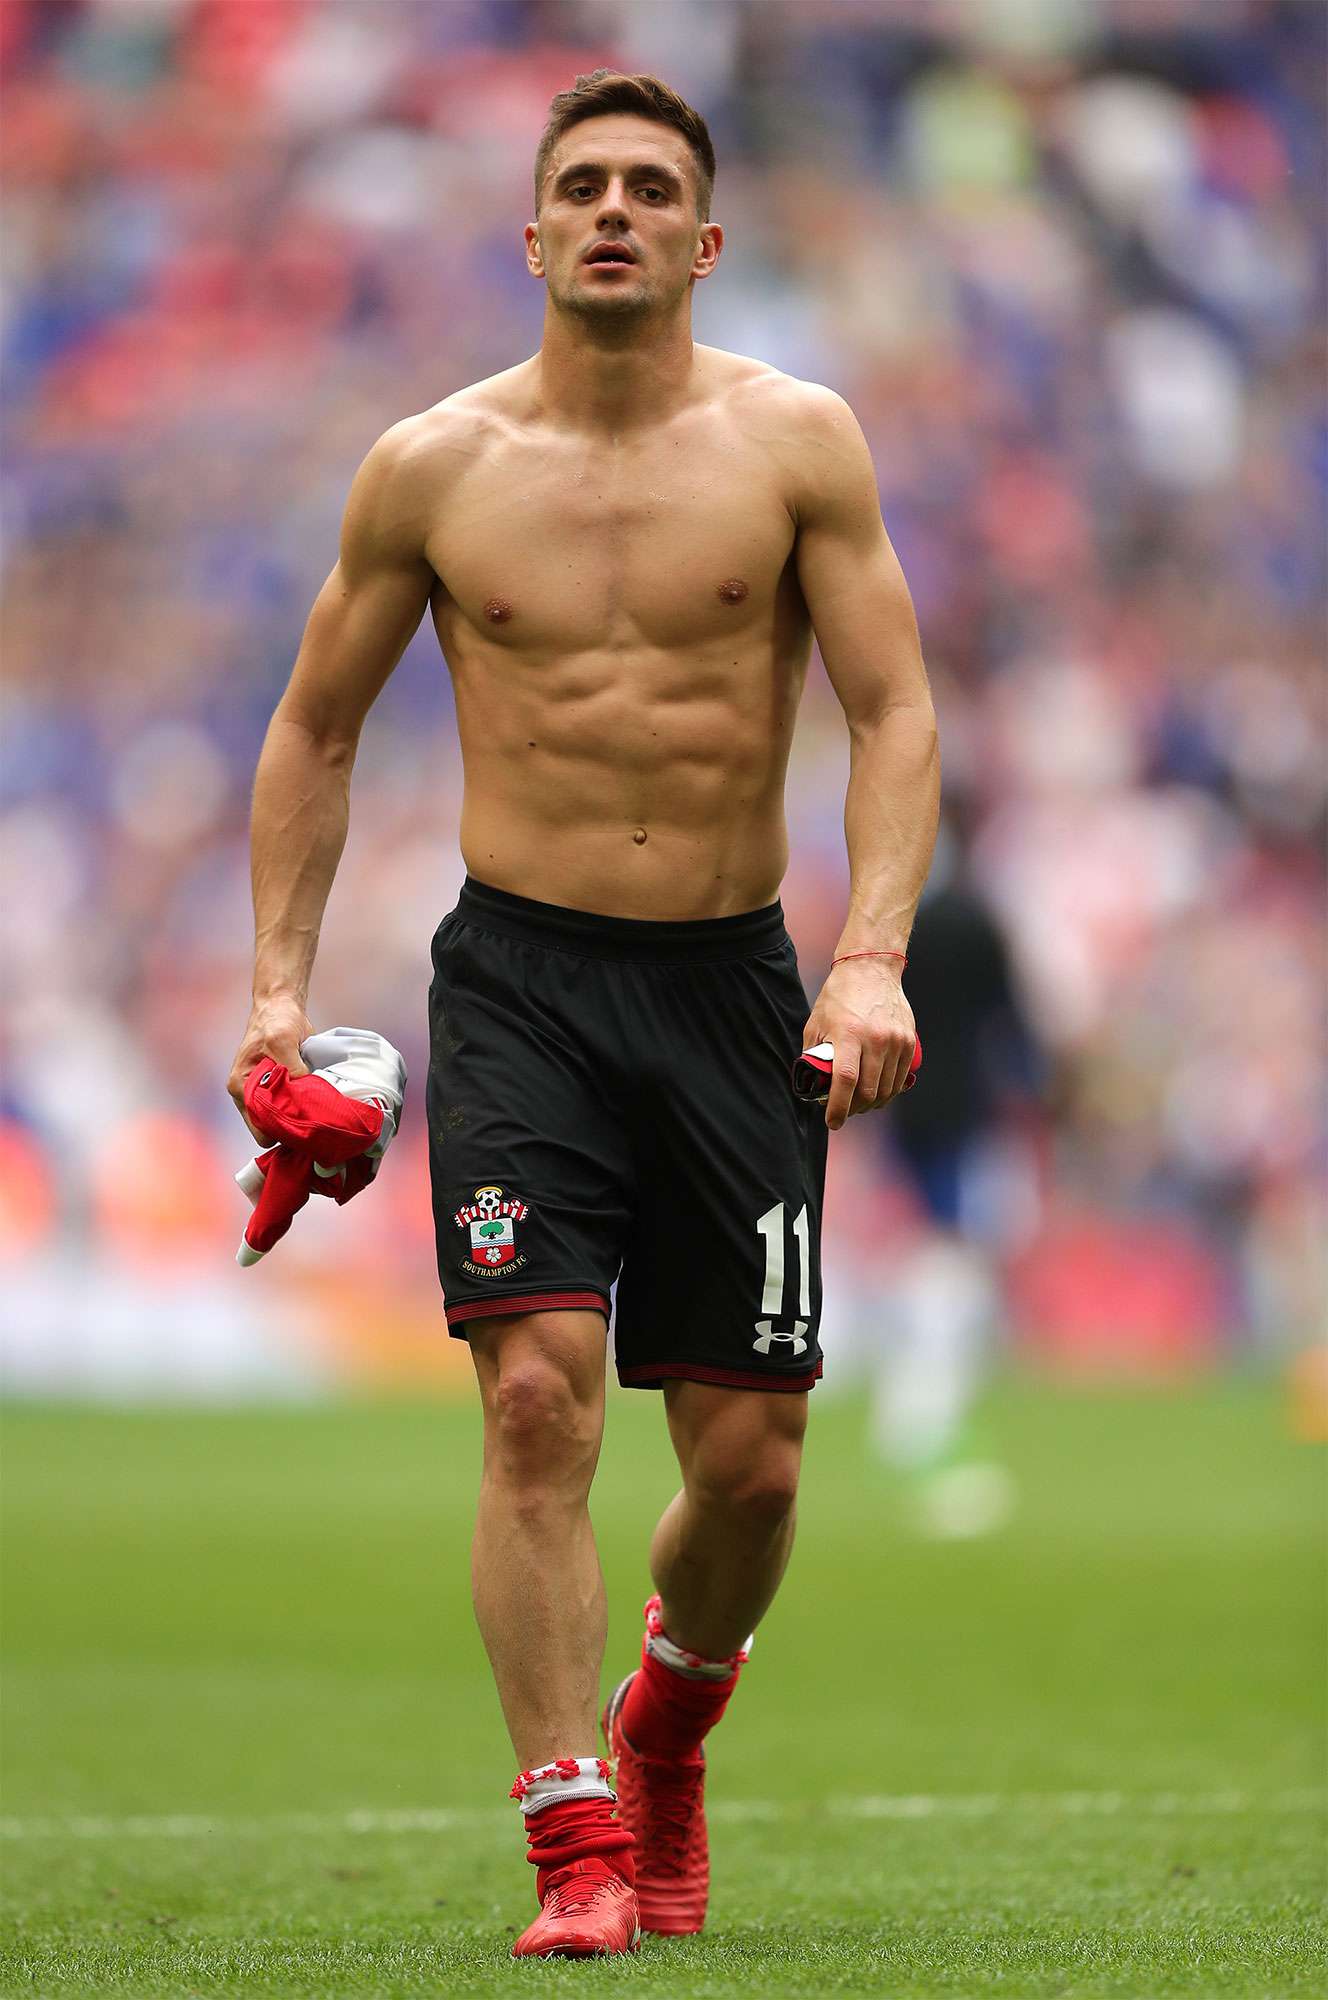 Photo: hottest world cup players